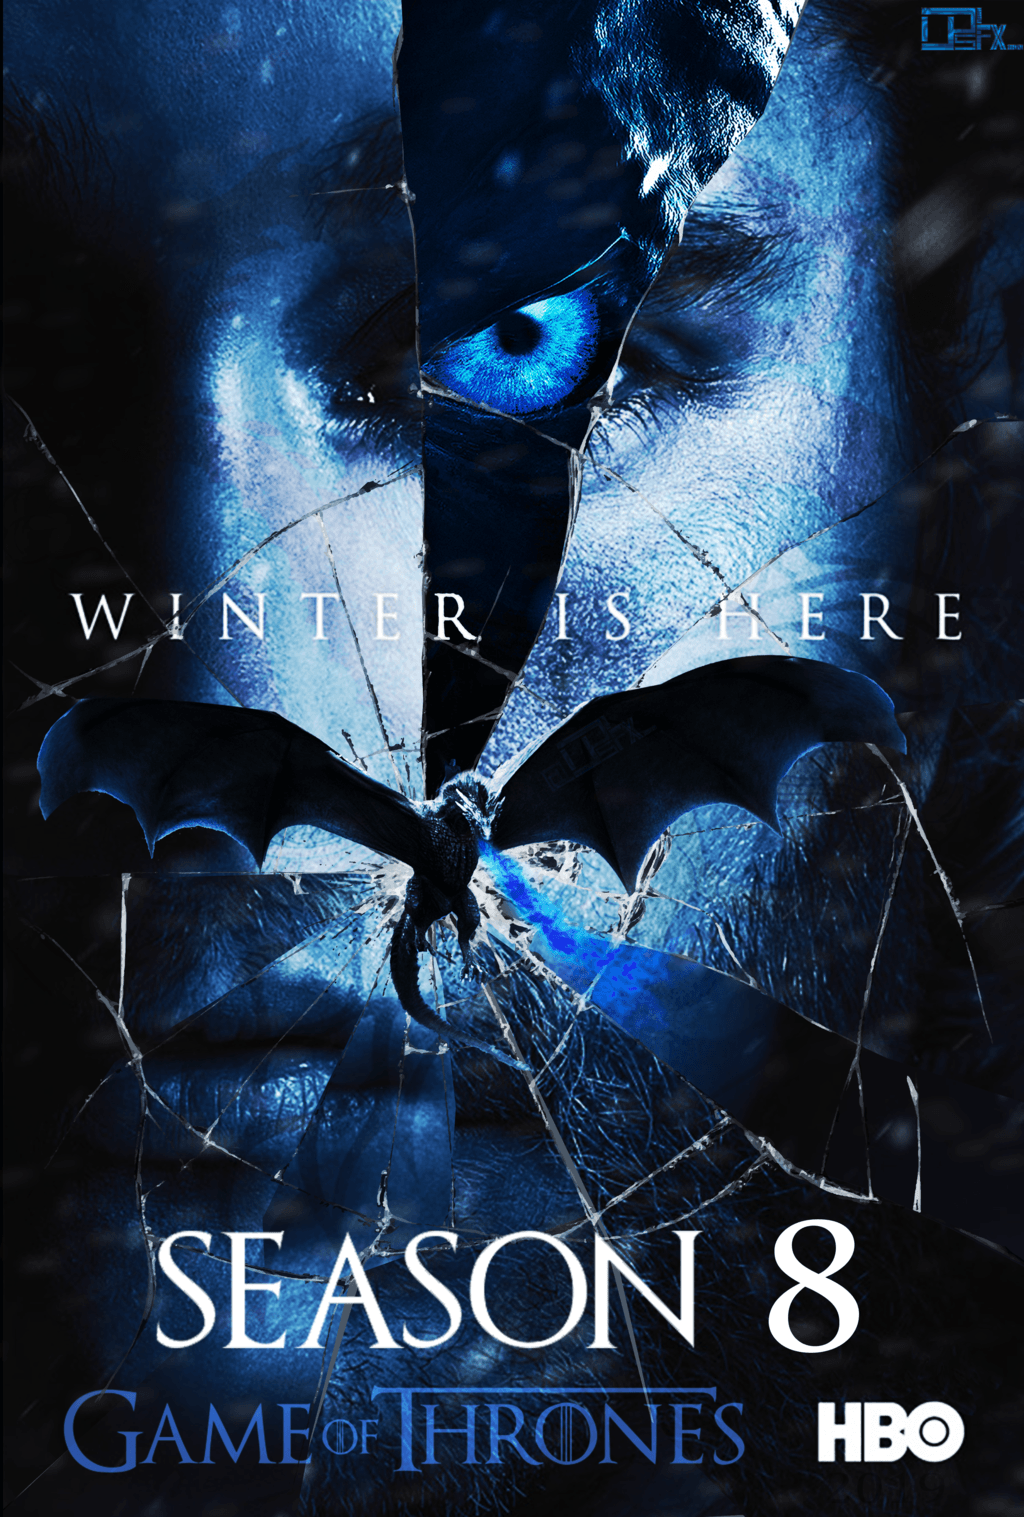 Game of Thrones Poster Season 8 by OPsFX